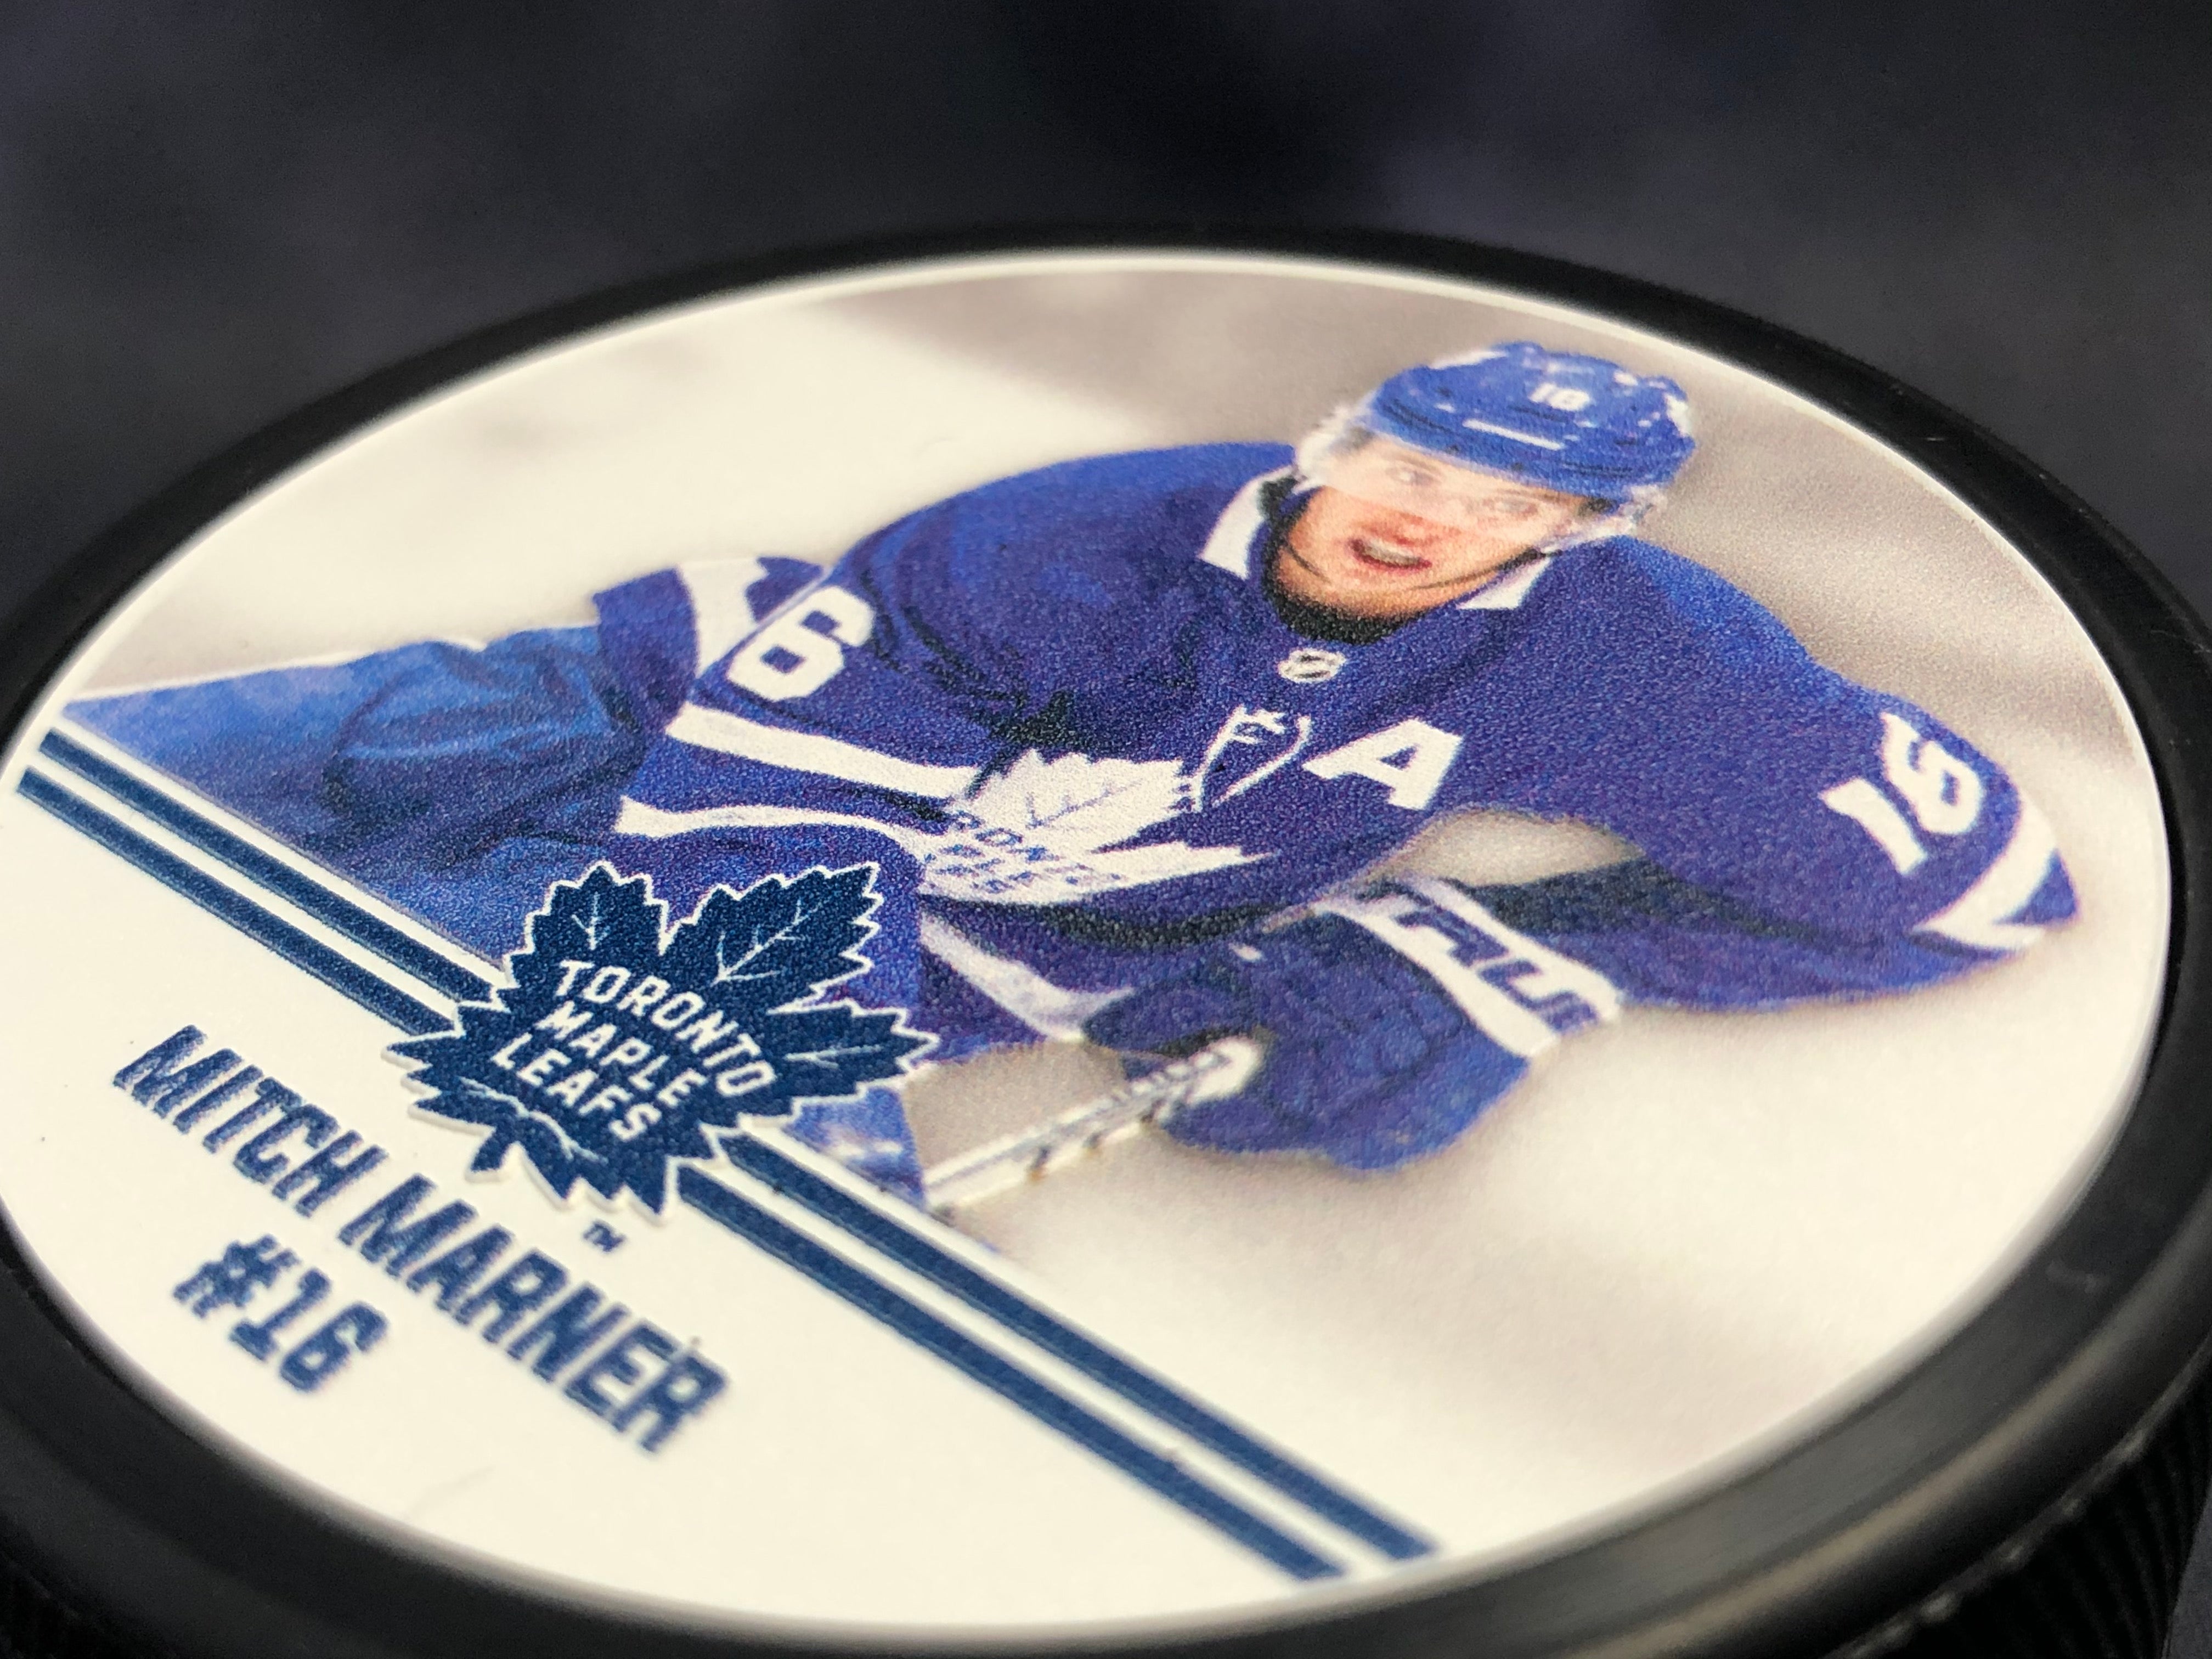 Maple Leafs Youth Away Jersey - MARNER – shop.realsports